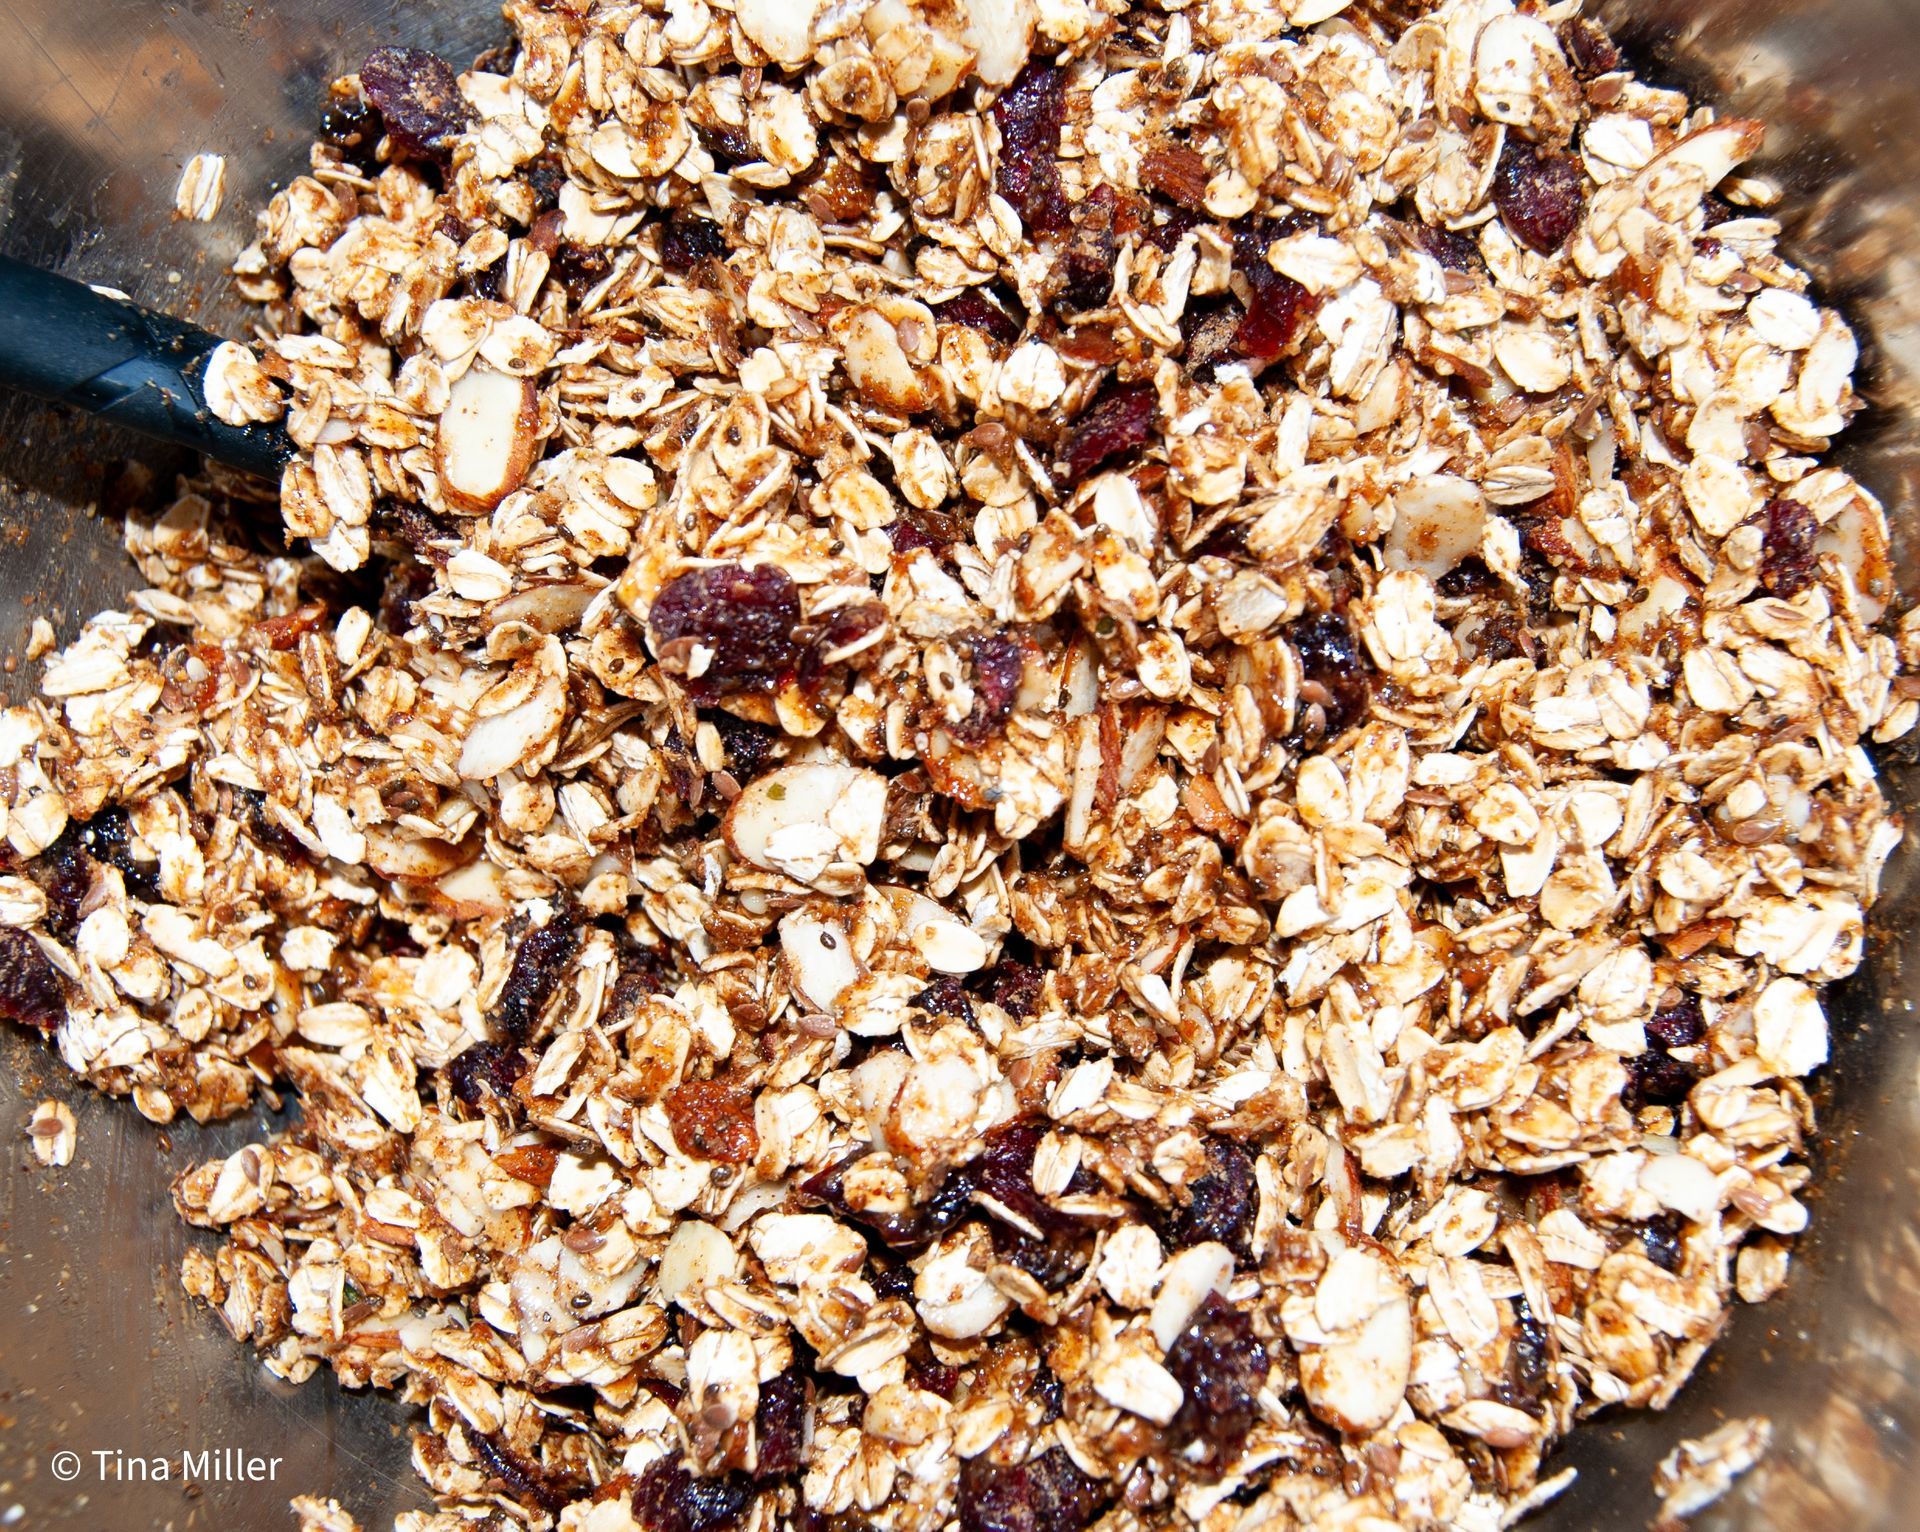 A granola mixture with an almond butter glaze ready to be baked.